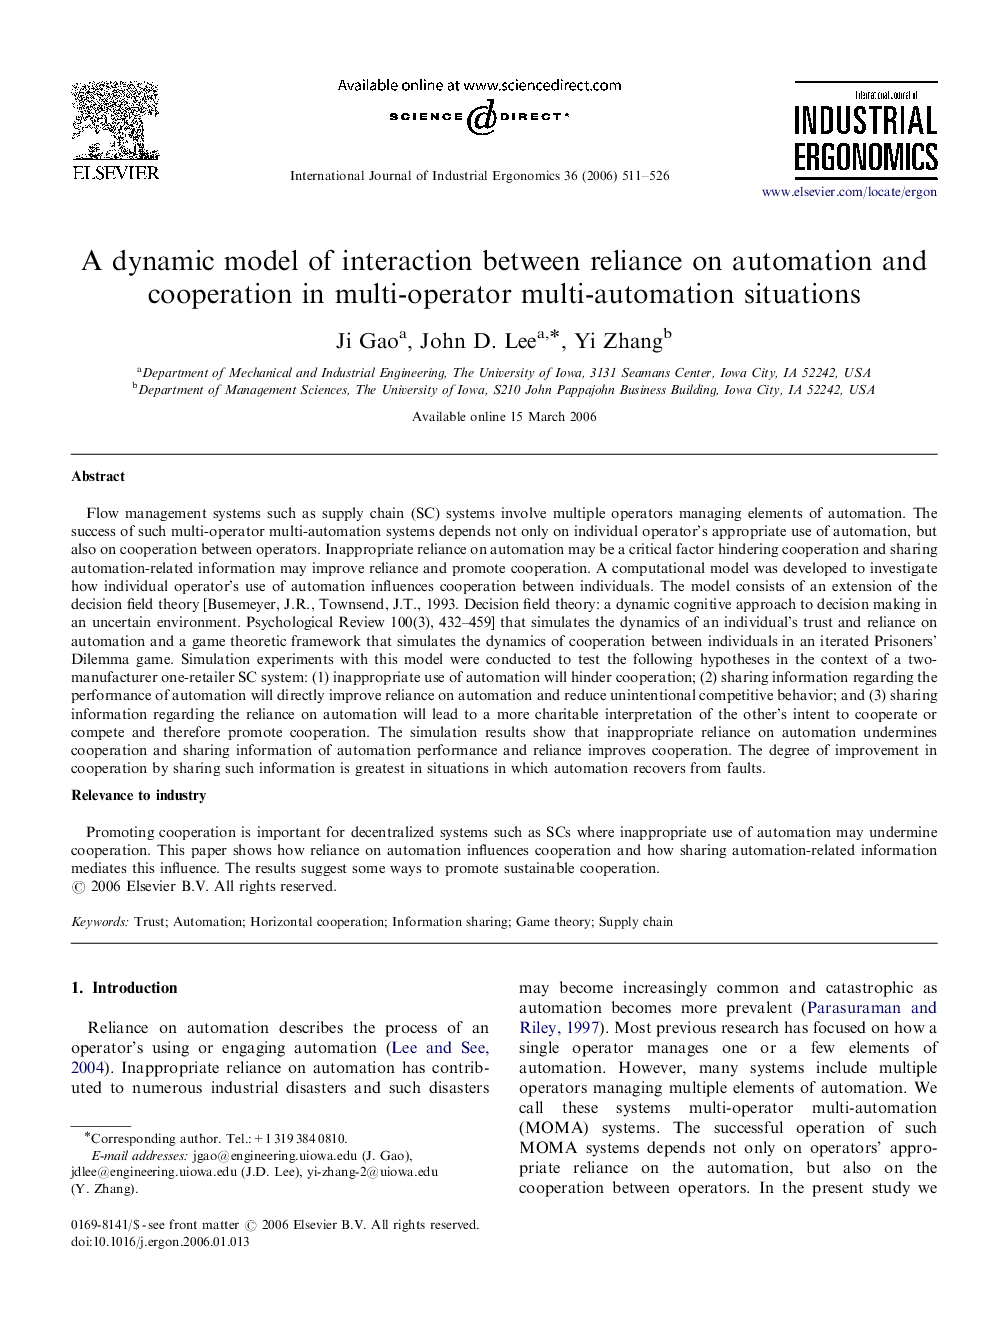 A dynamic model of interaction between reliance on automation and cooperation in multi-operator multi-automation situations